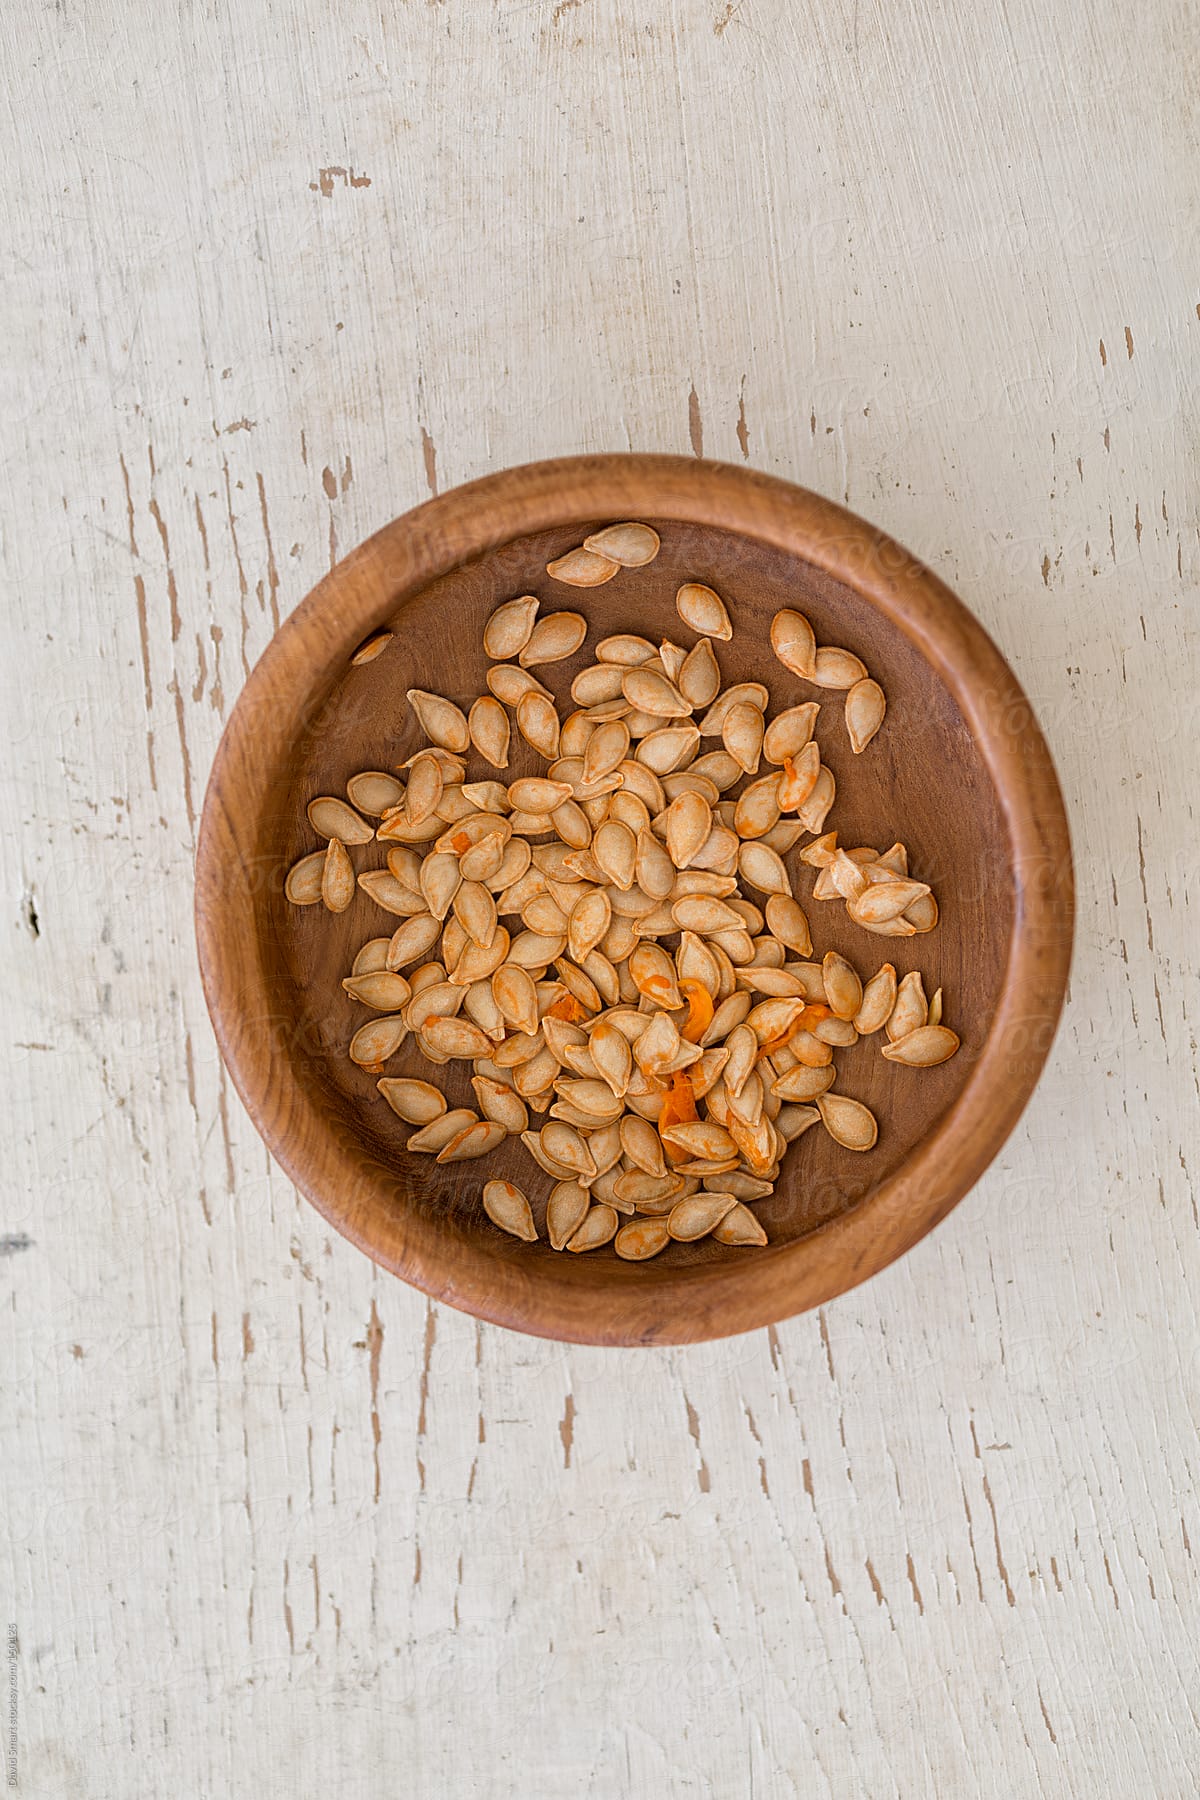 Butternut Squash Seeds in a Wooden Bowl